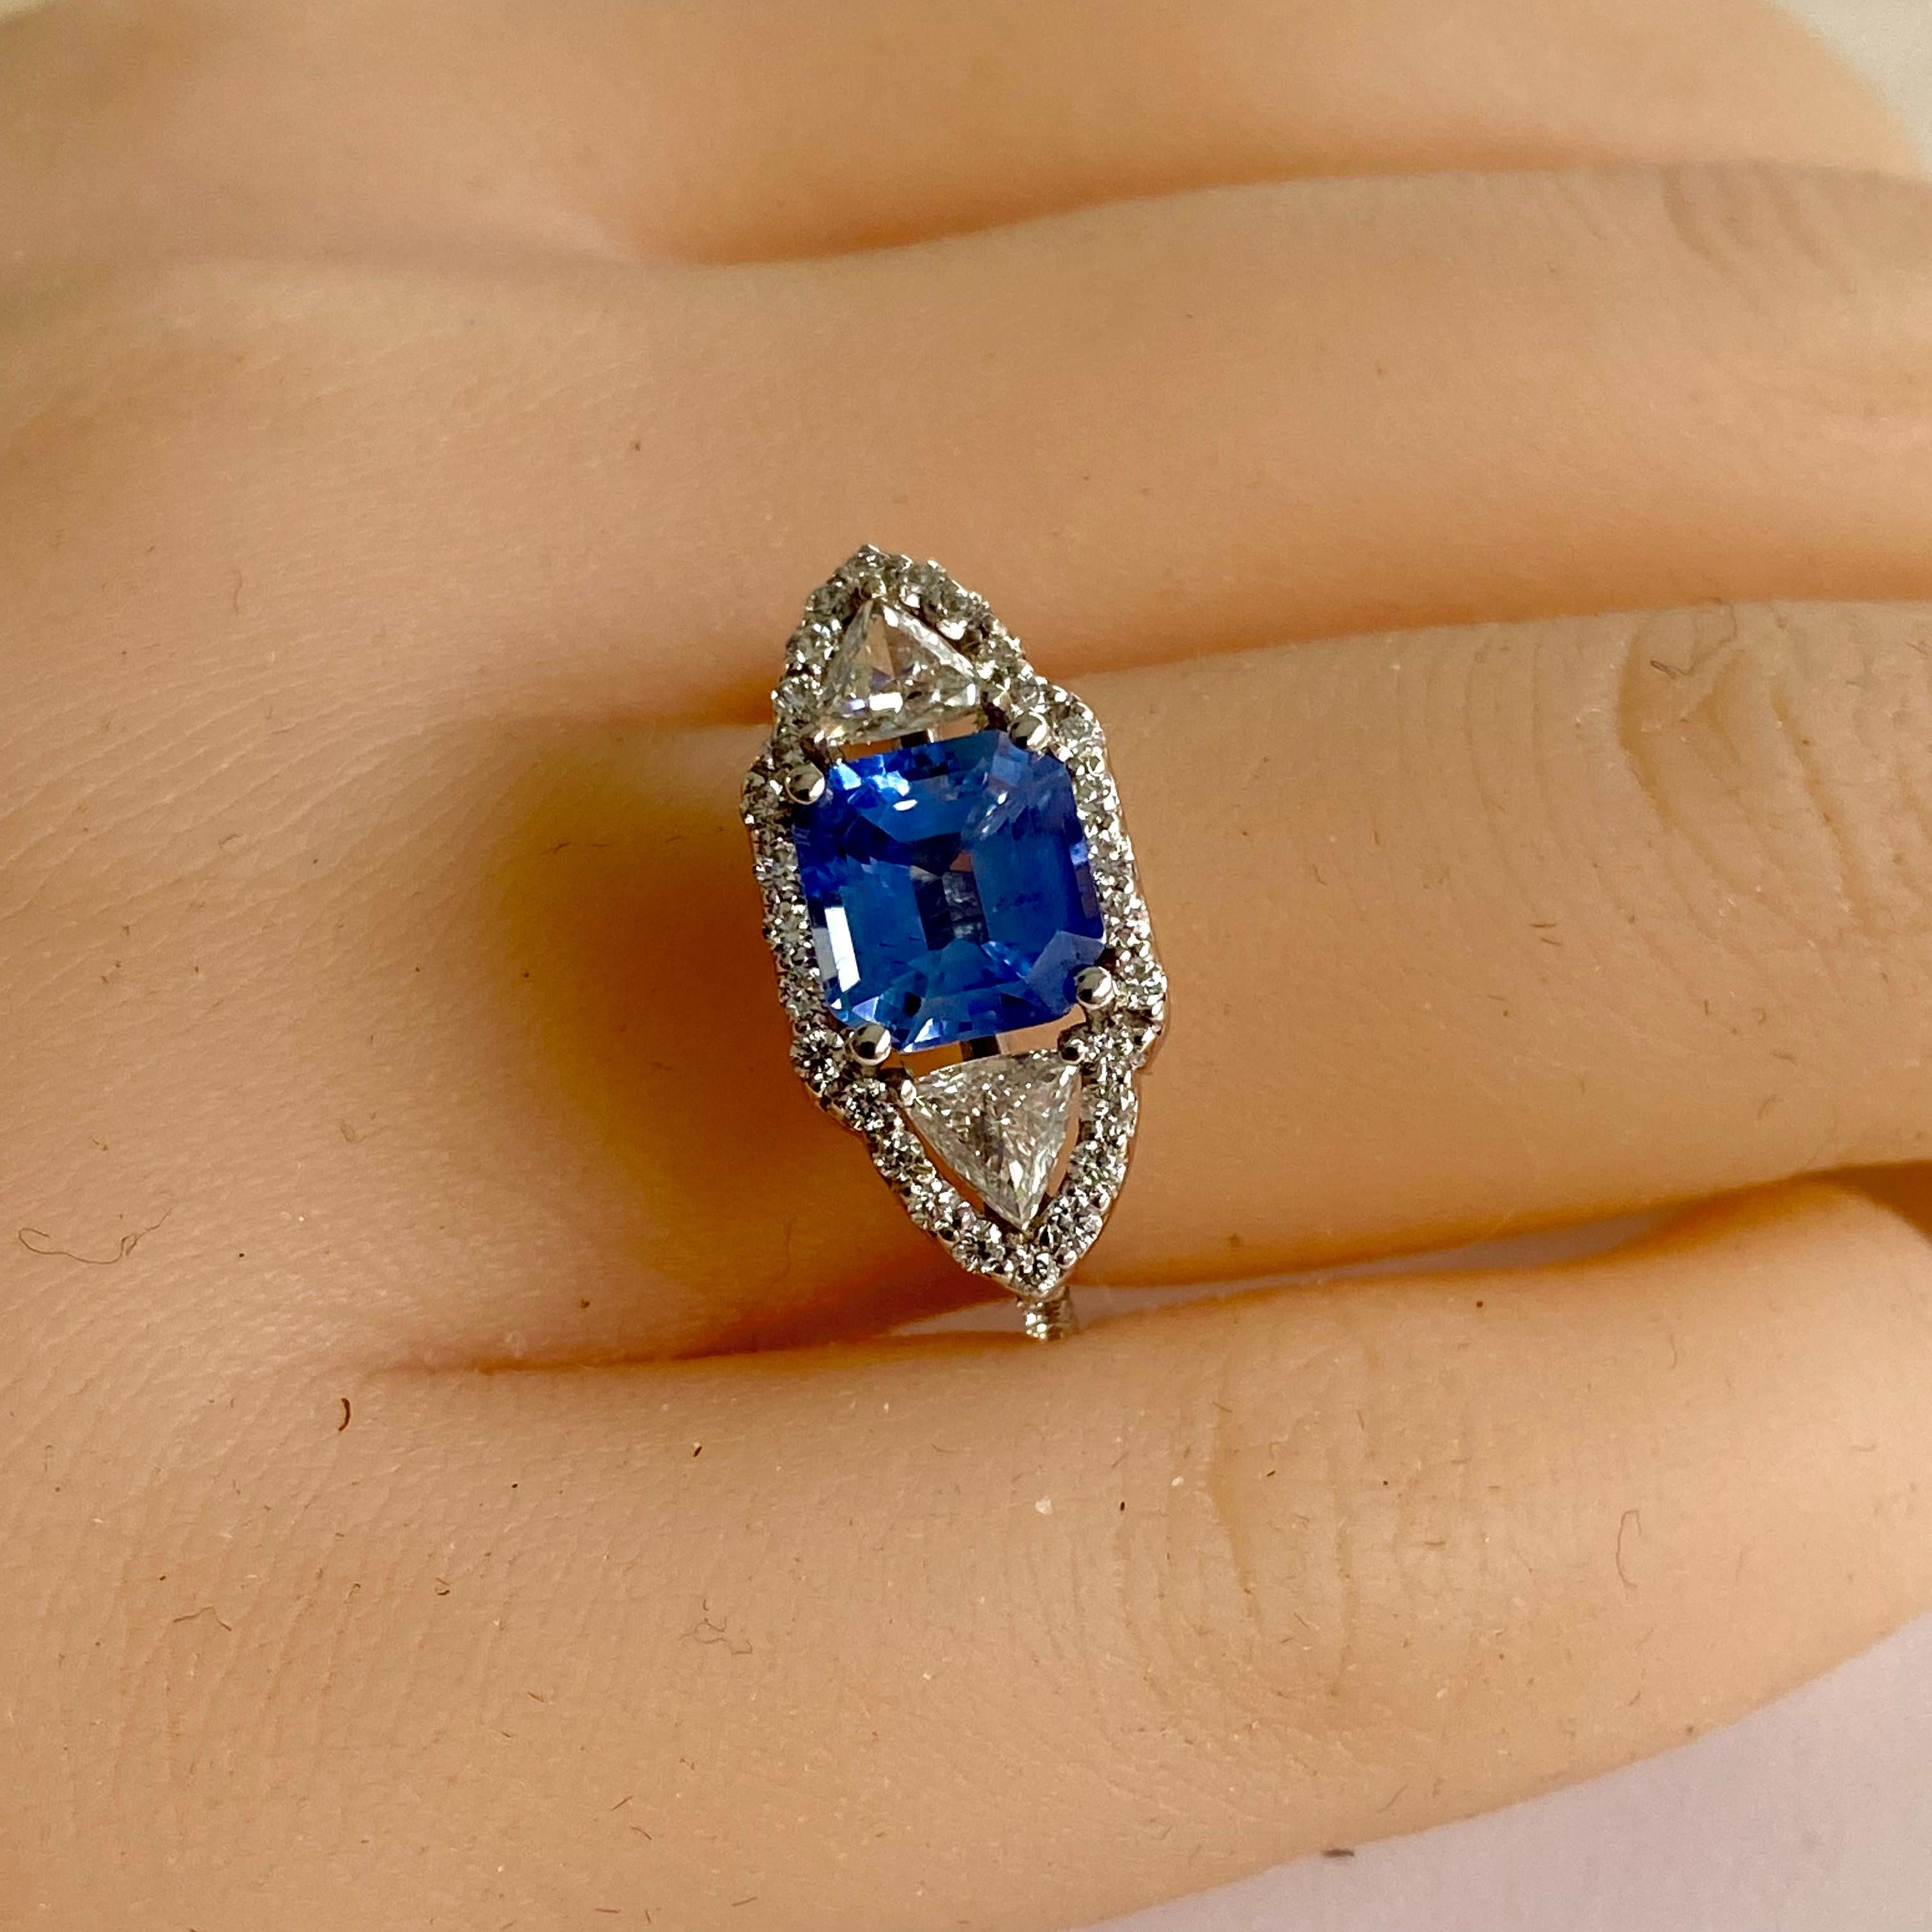  Emerald Shaped Ceylon Sapphire Diamond 3.75 Carat 18 Karat Gold Cocktail Ring  In New Condition For Sale In New York, NY